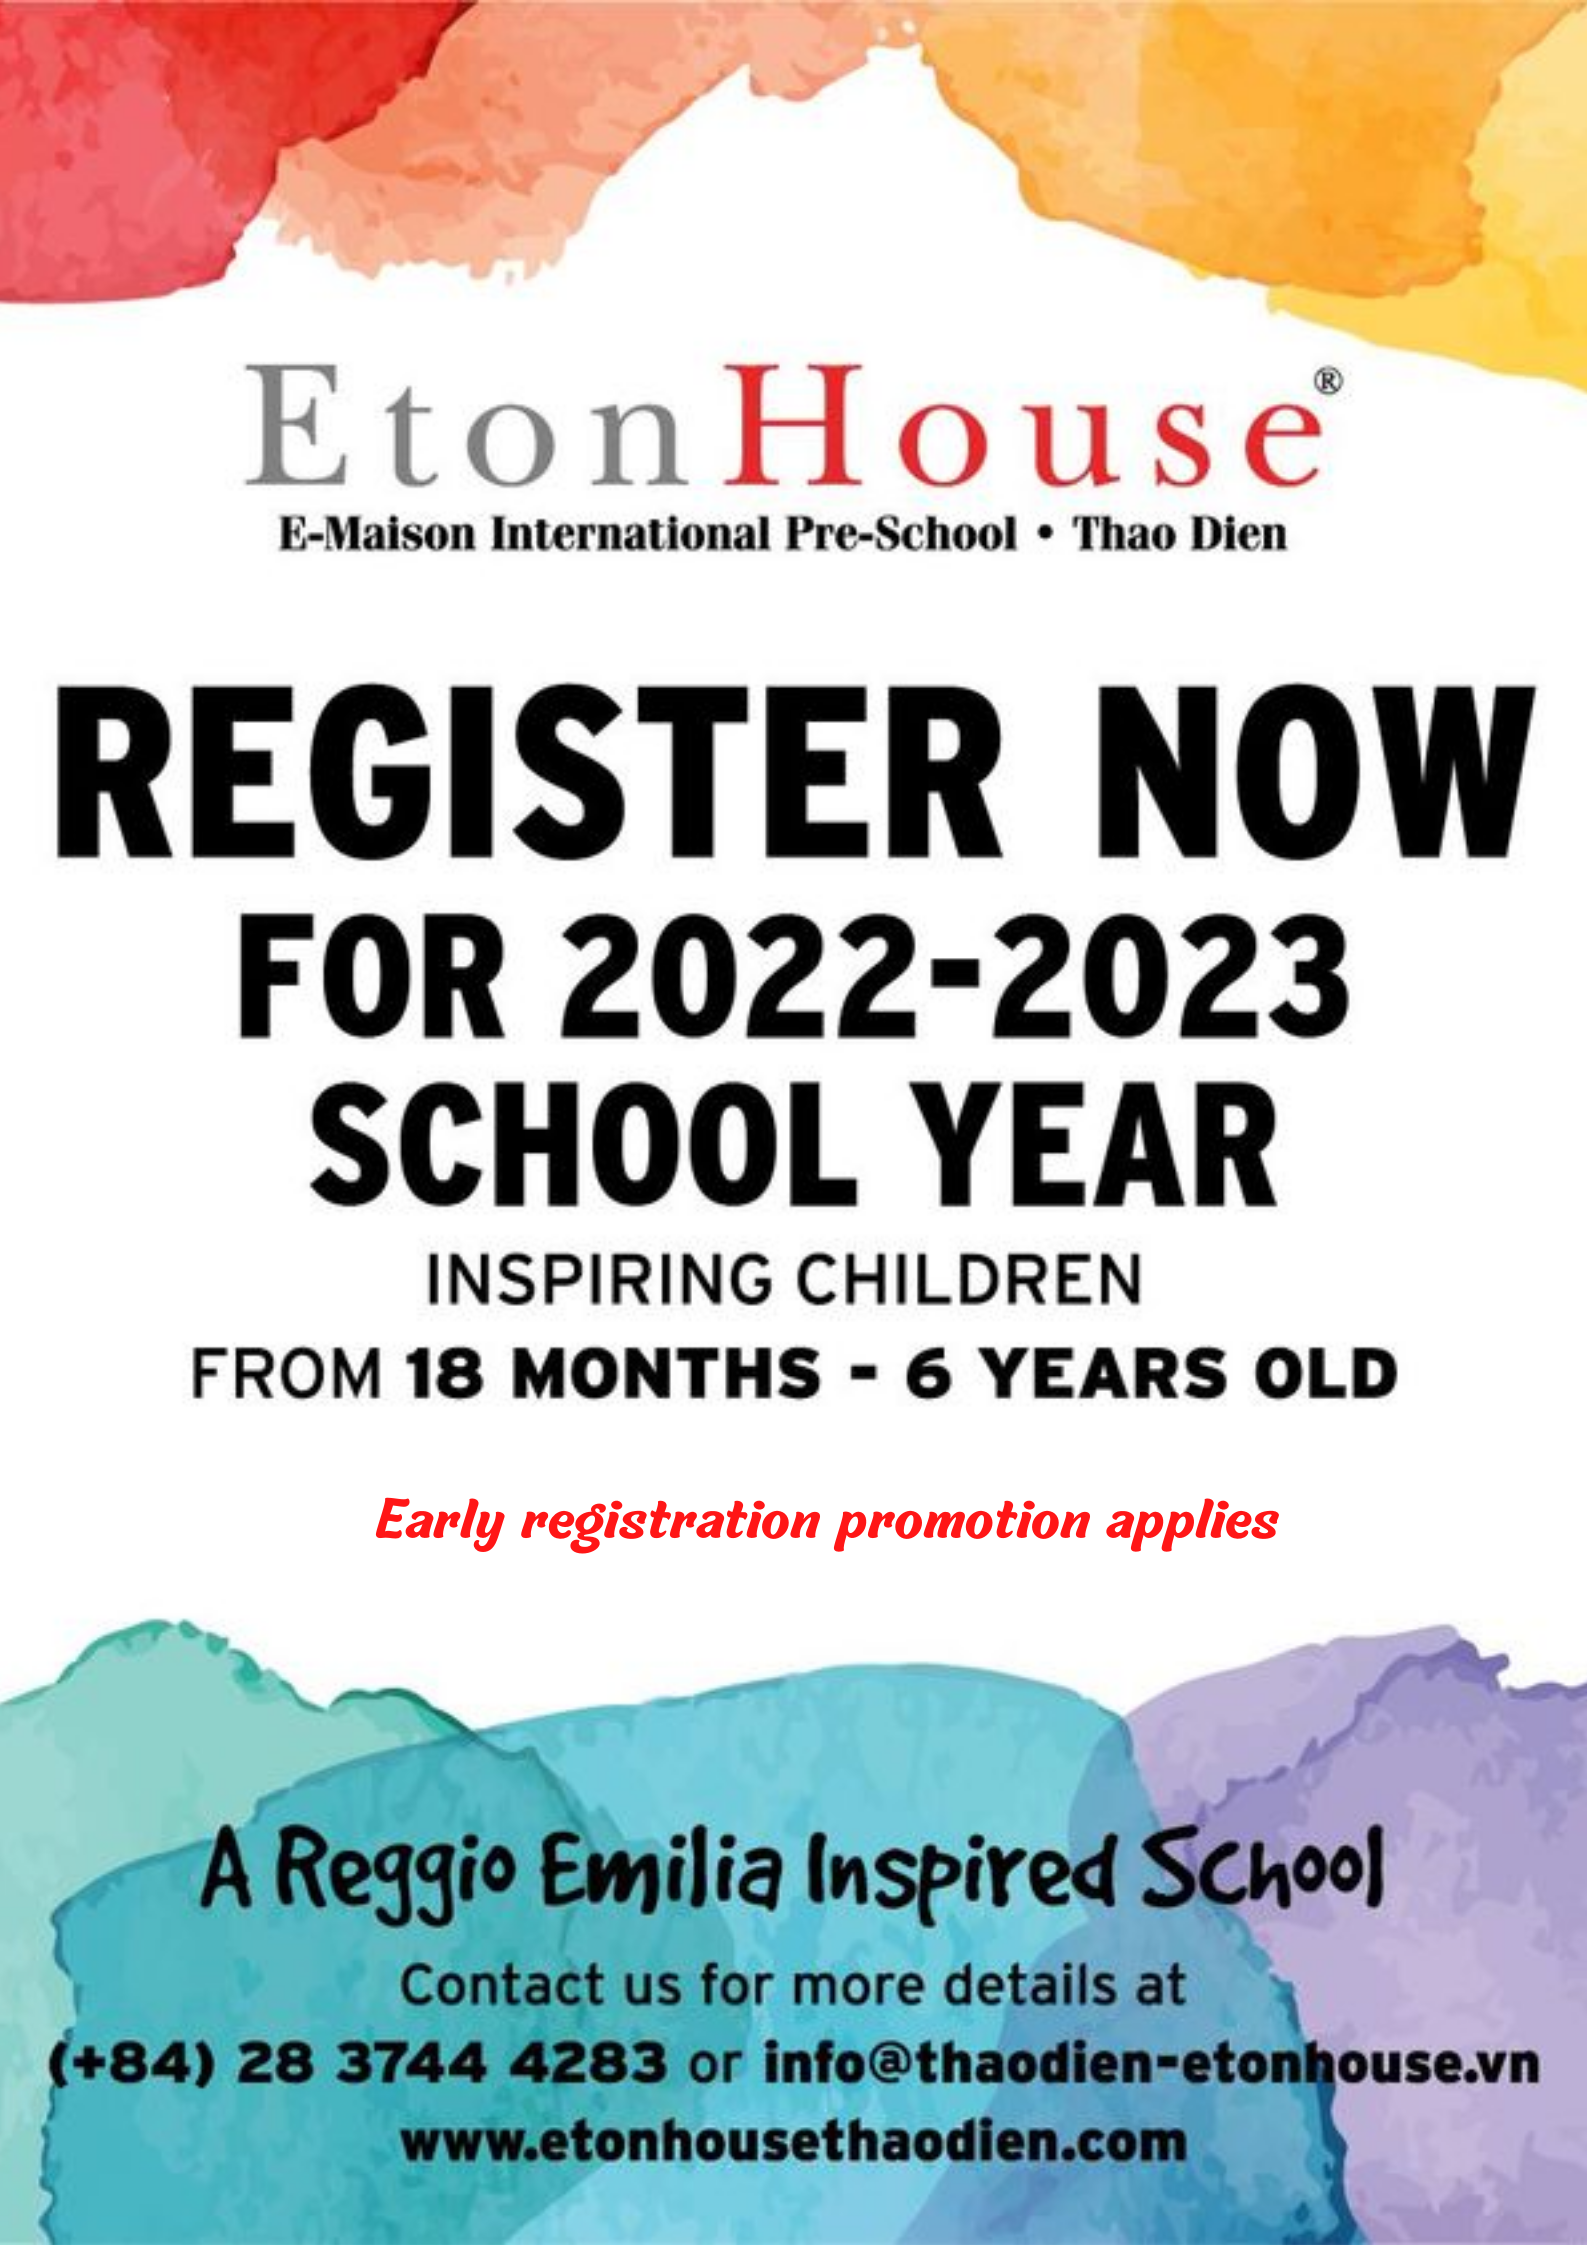 Enrollment is now open for the school year 2022 – 2023